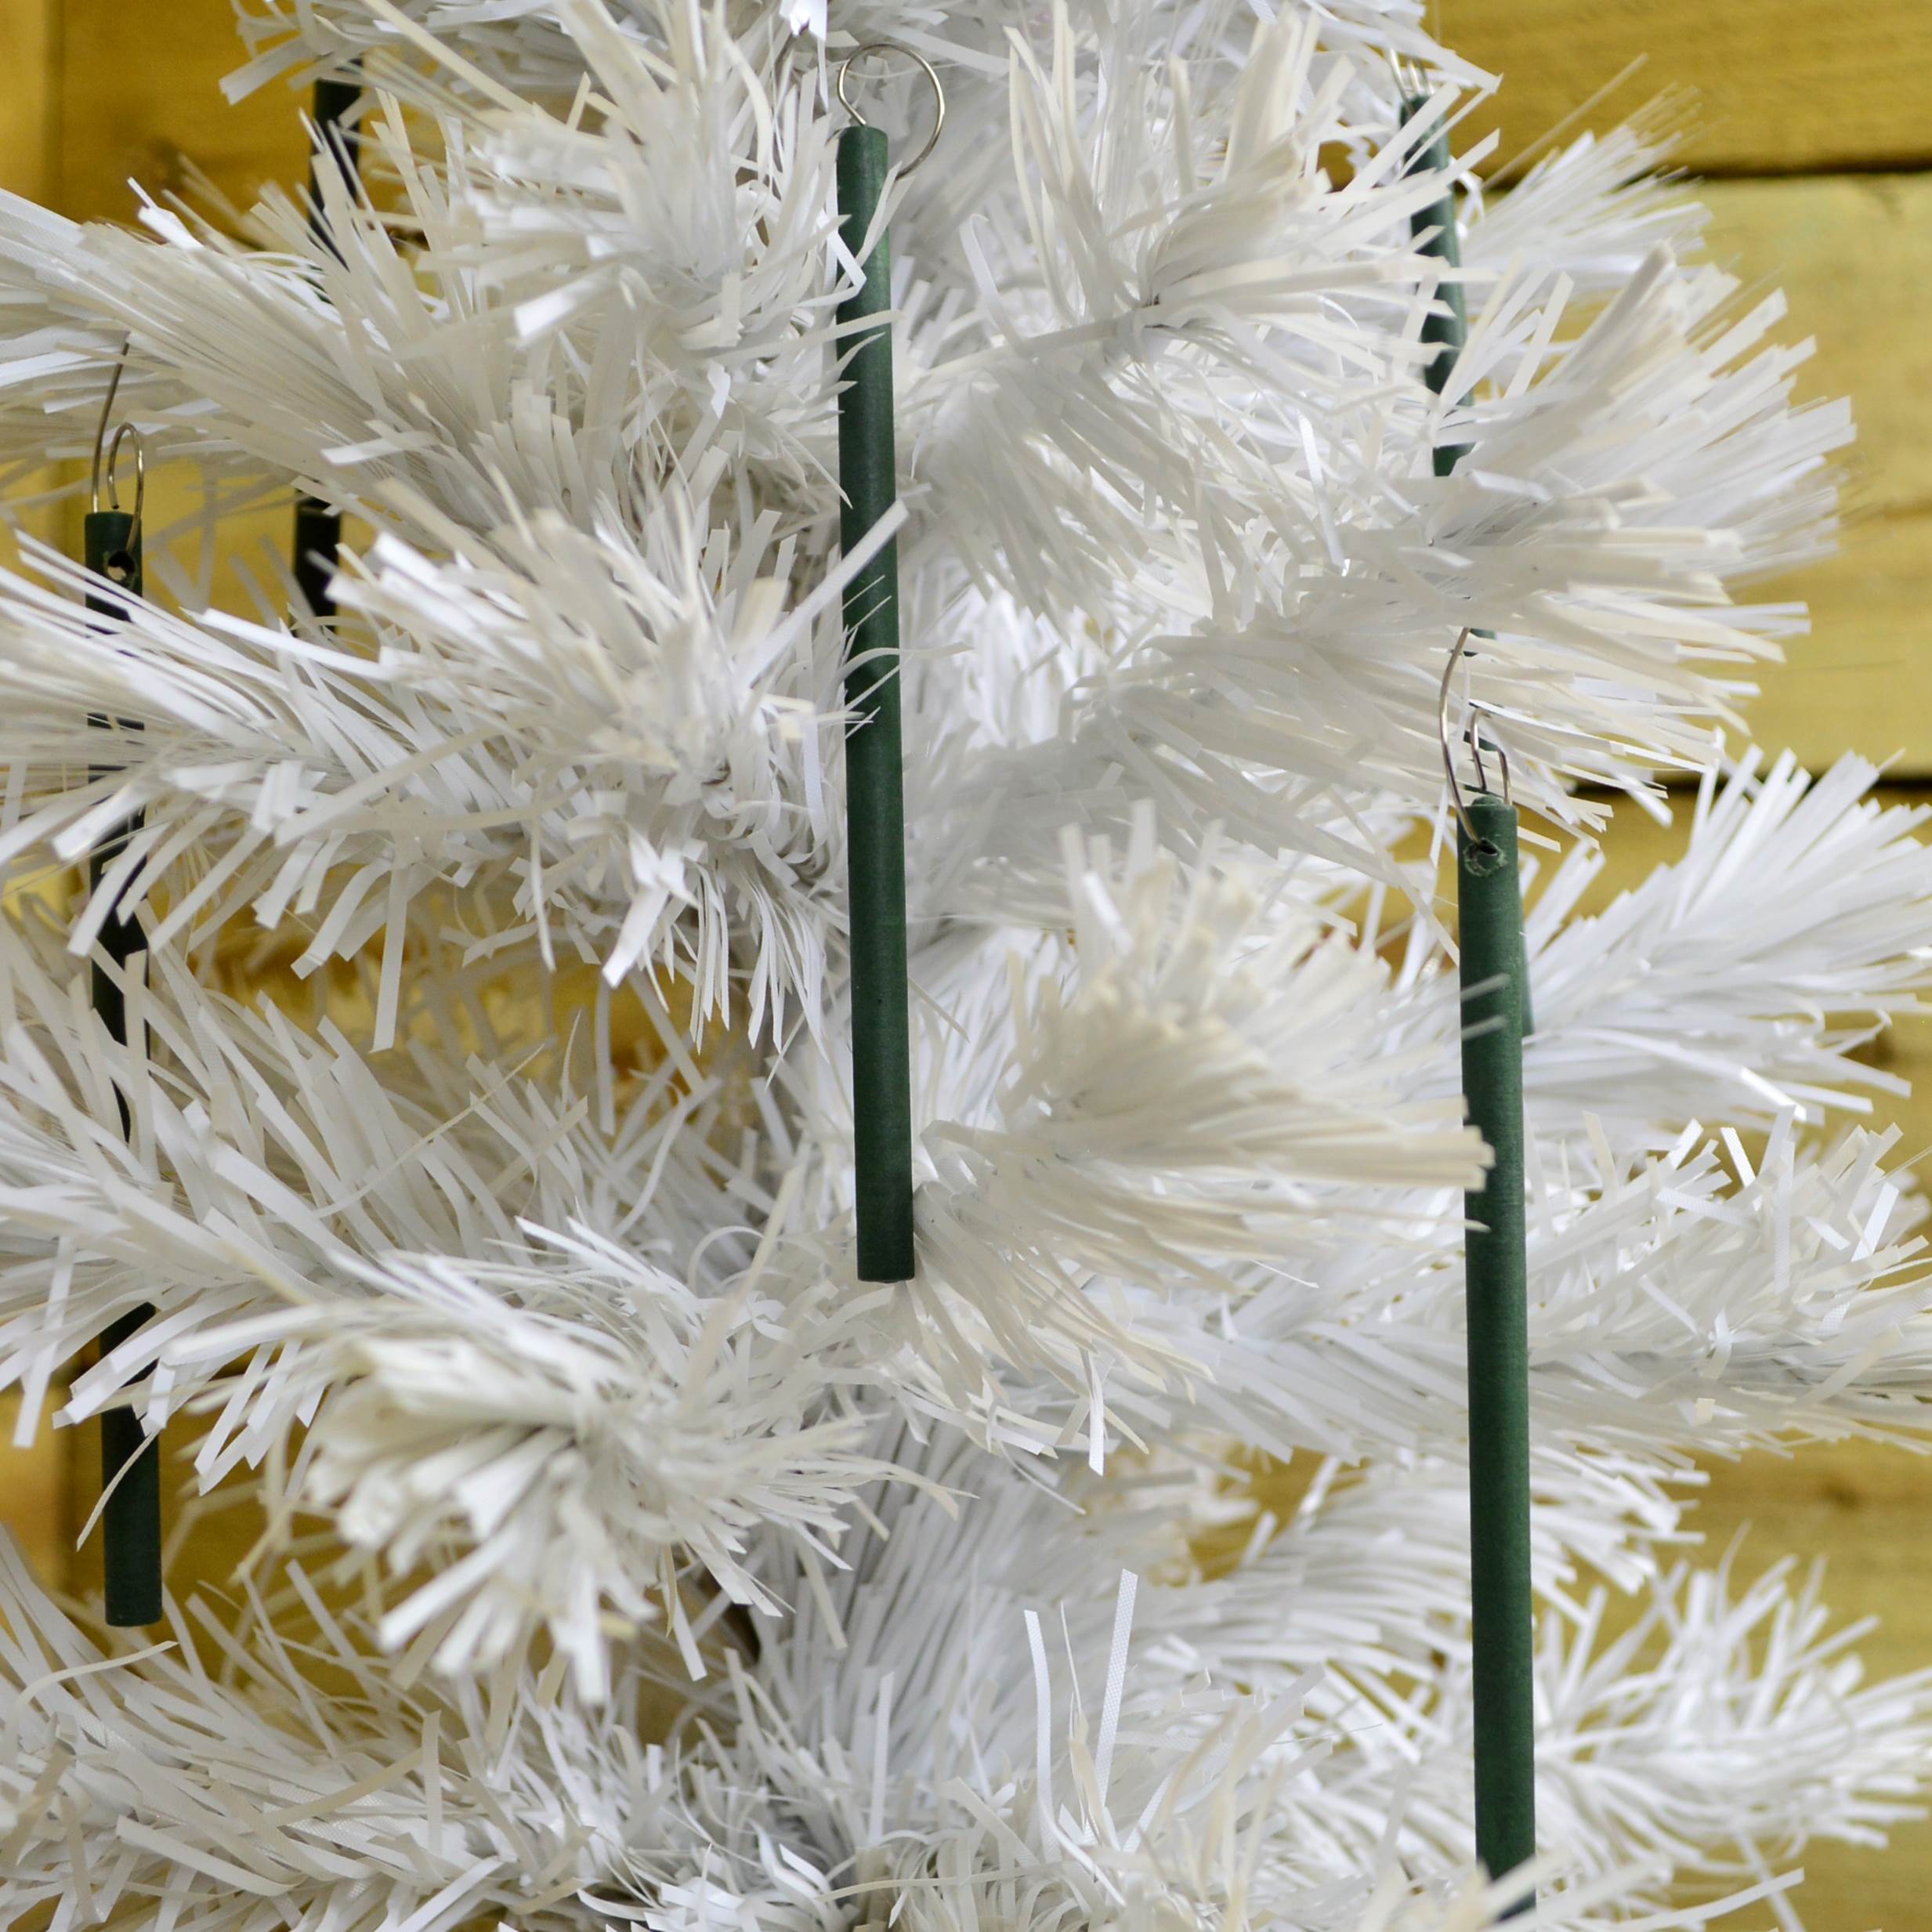 6 Scentsicles Scented Hanging Ornaments Sticks - White Winter Fir